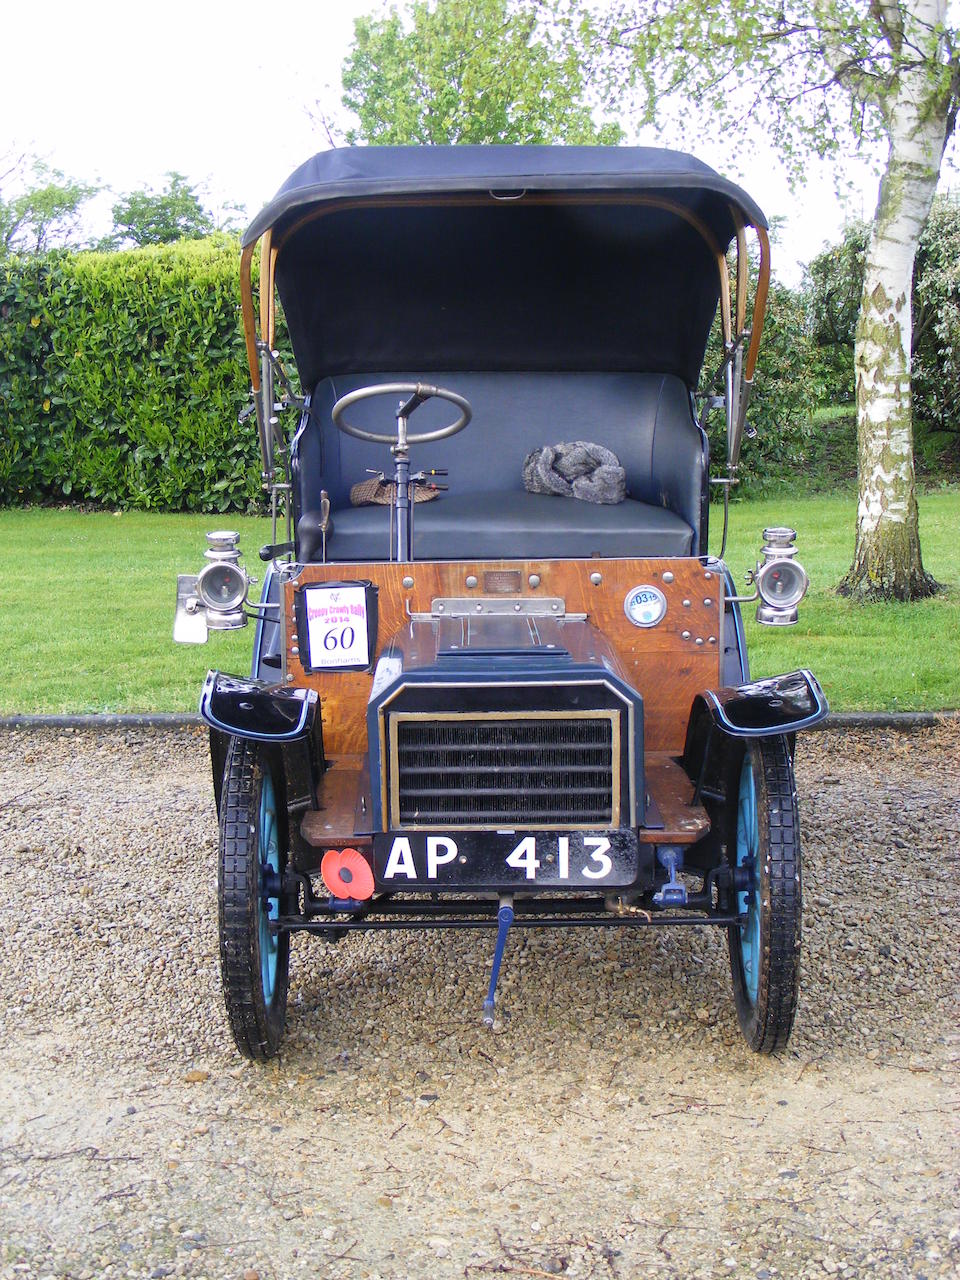 1904 Humberette 'Royal Beeston' 6&#189;hp Doctor's Limousine  Chassis no. 2109